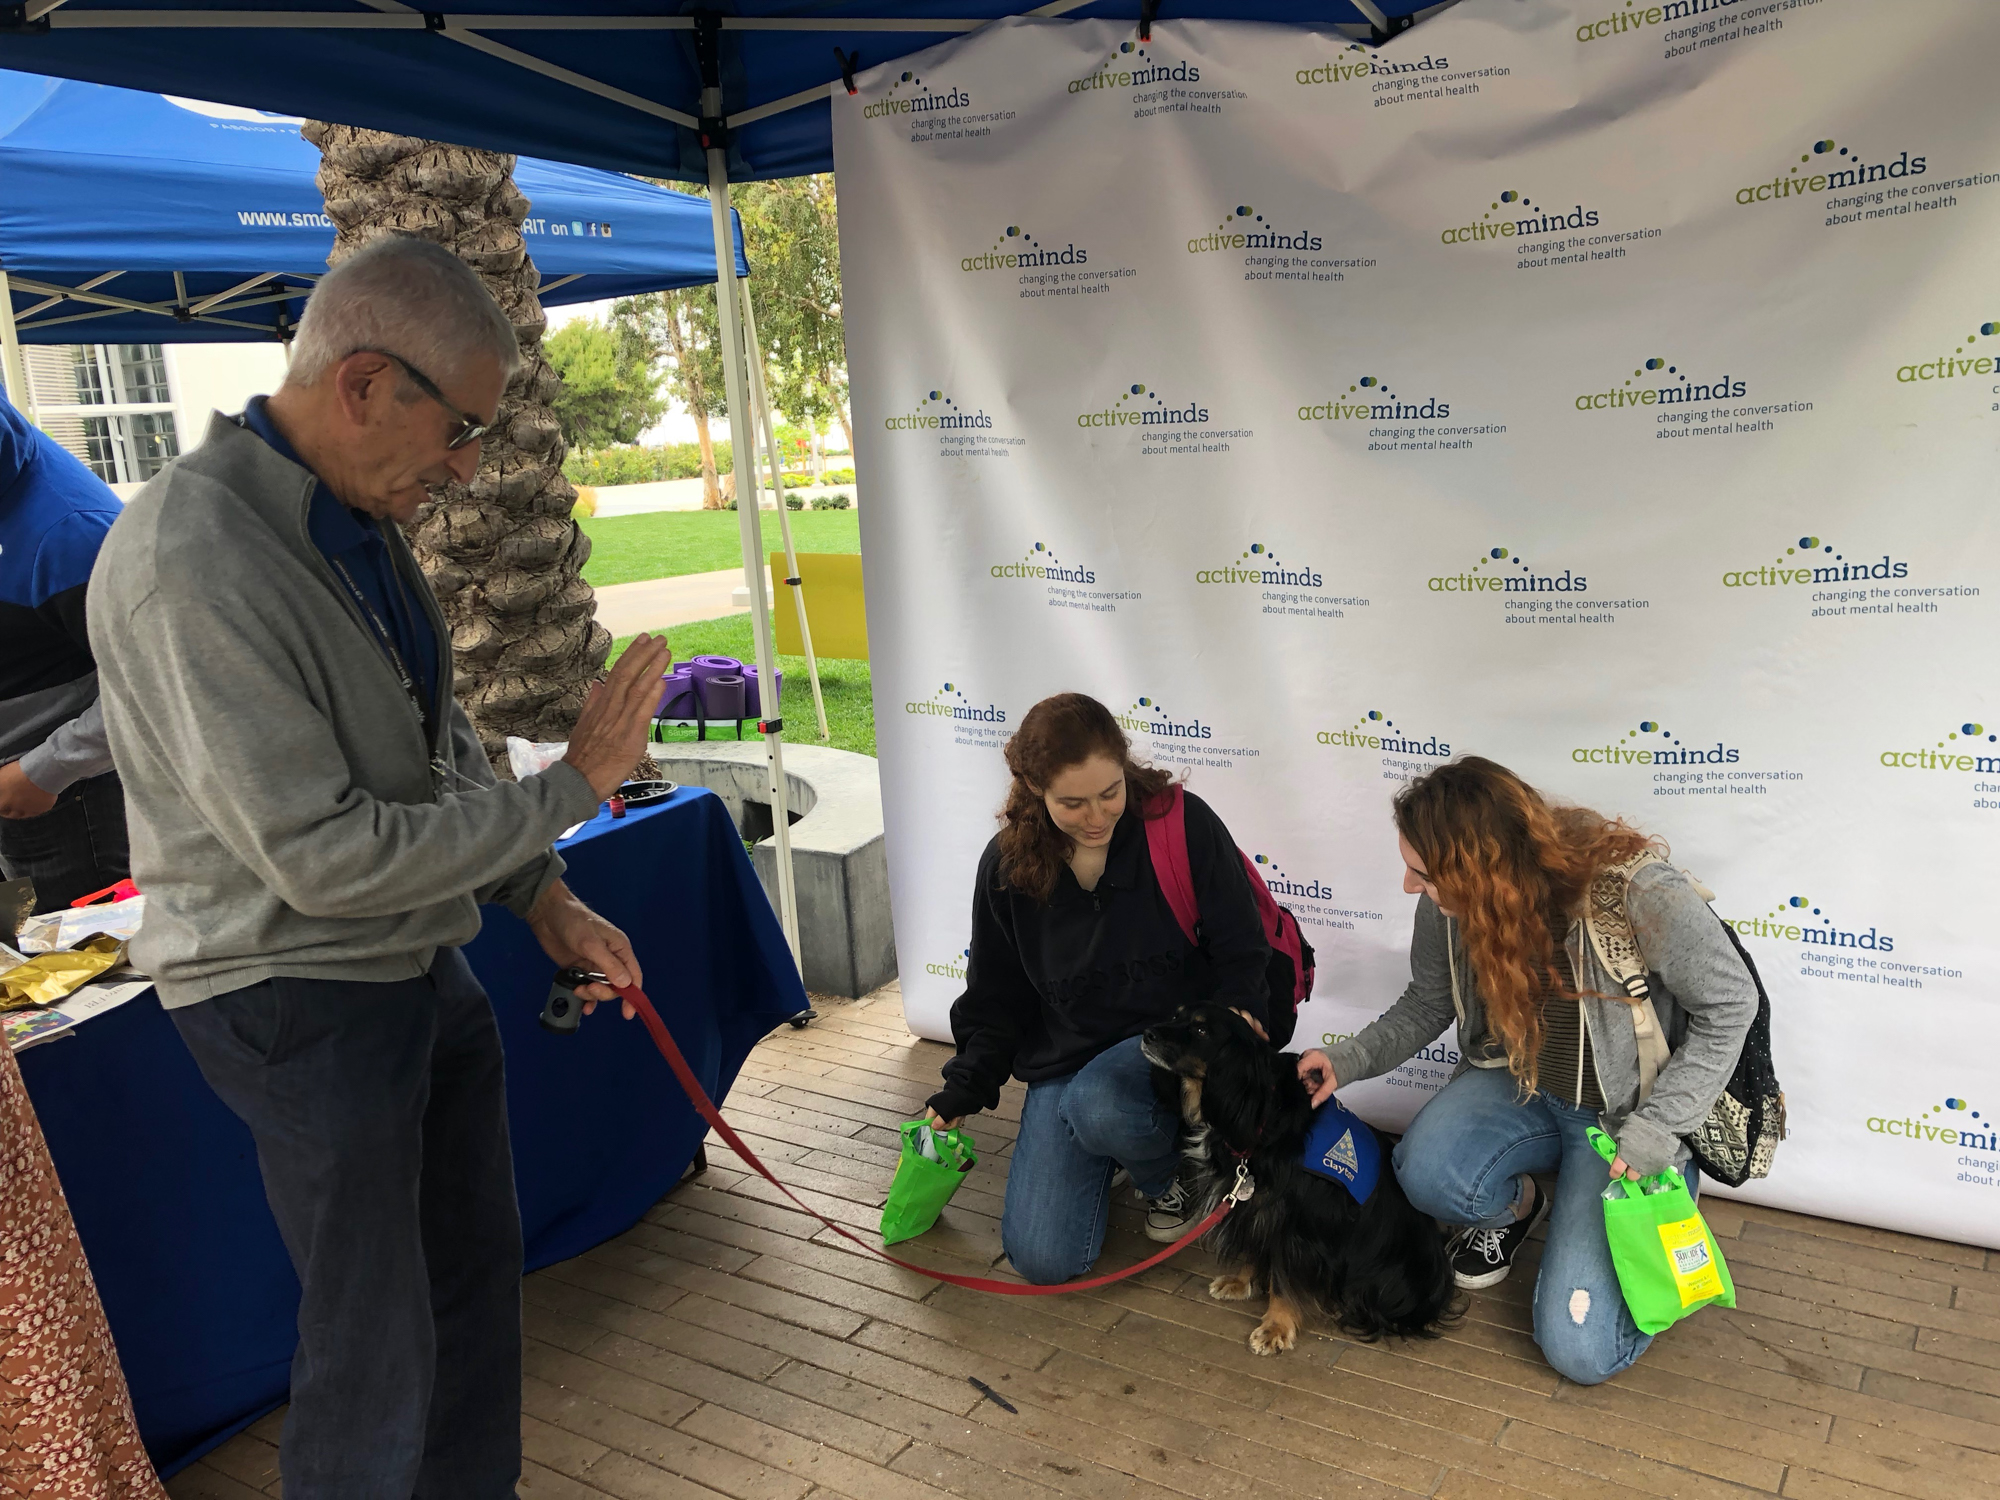  Bob Cowan with Paws for healing brought along dog Clayton to say hello at Active Minds event on Thursday May, 24 at Santa Monica College, in Santa Monica, California. Here with students Madeline Samson (left) and Skyler Stark (right). (Jennifer Nyst